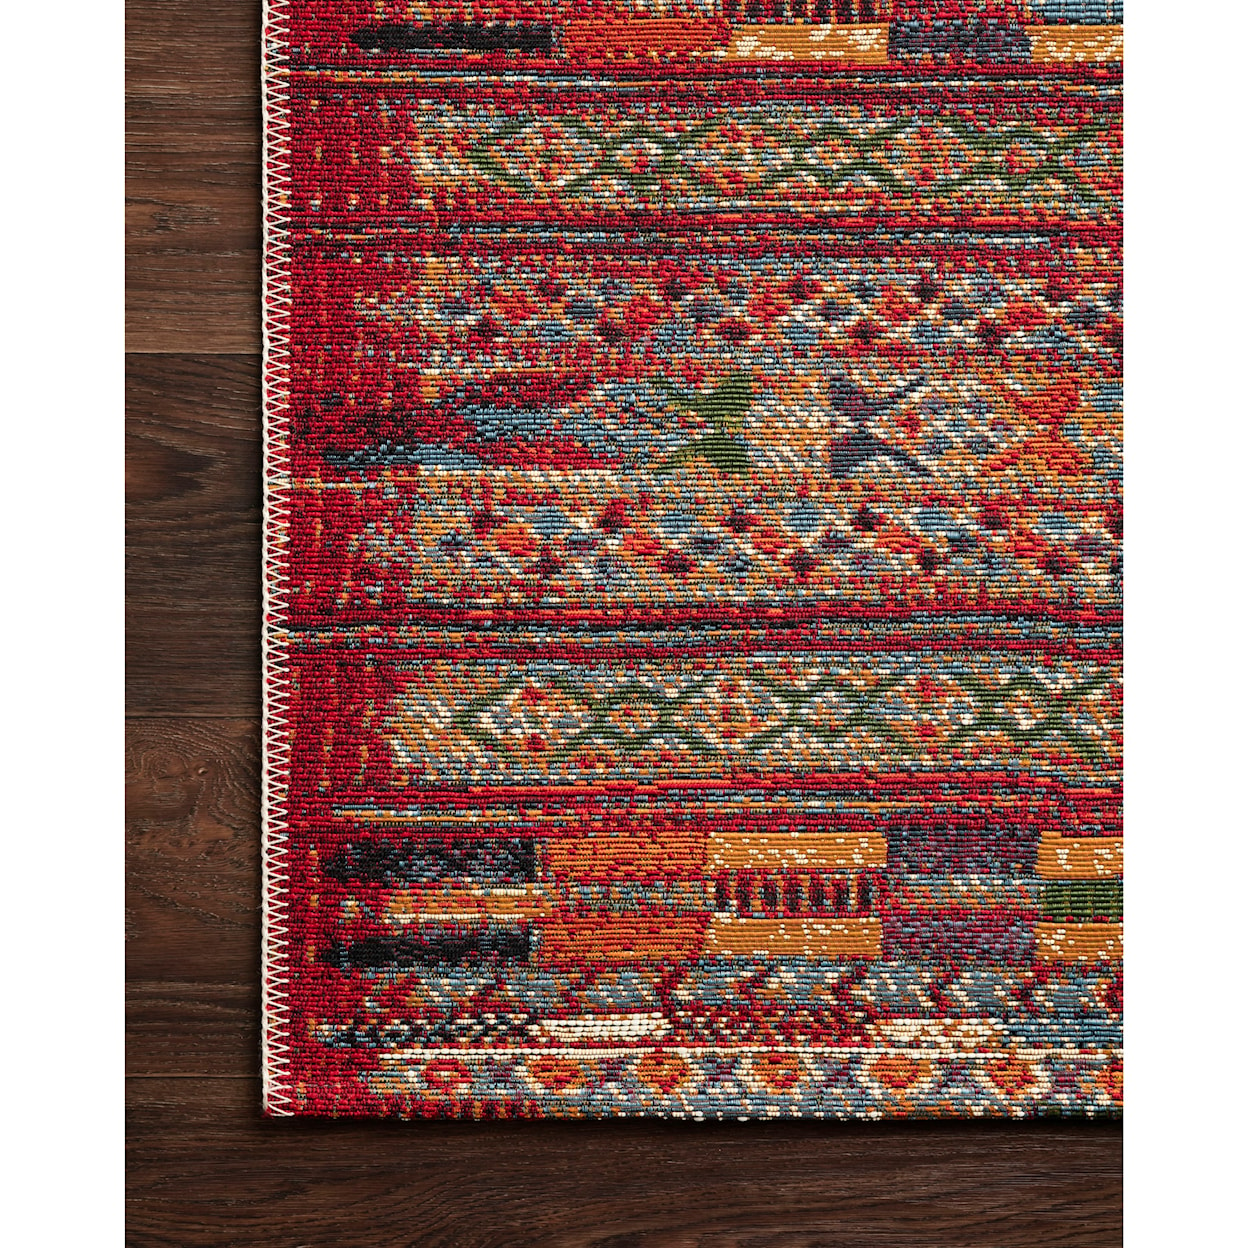 Reeds Rugs Mika 6'7" x 9'4" Red / Multi Rug